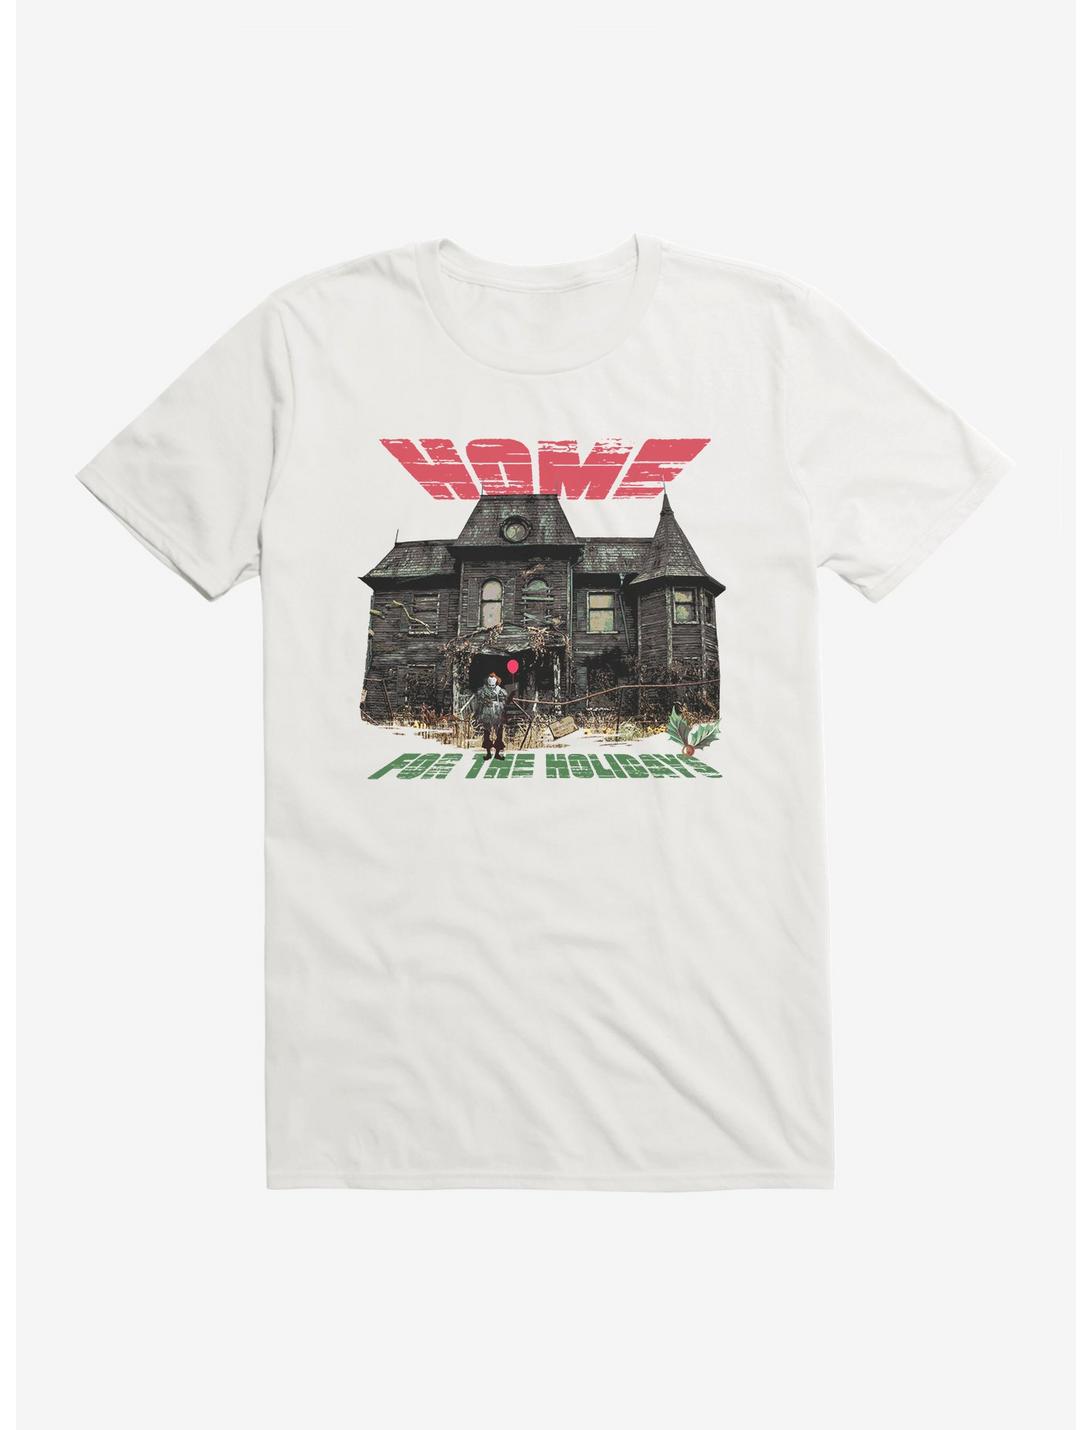 IT Home For The Holidays T-Shirt, WHITE, hi-res